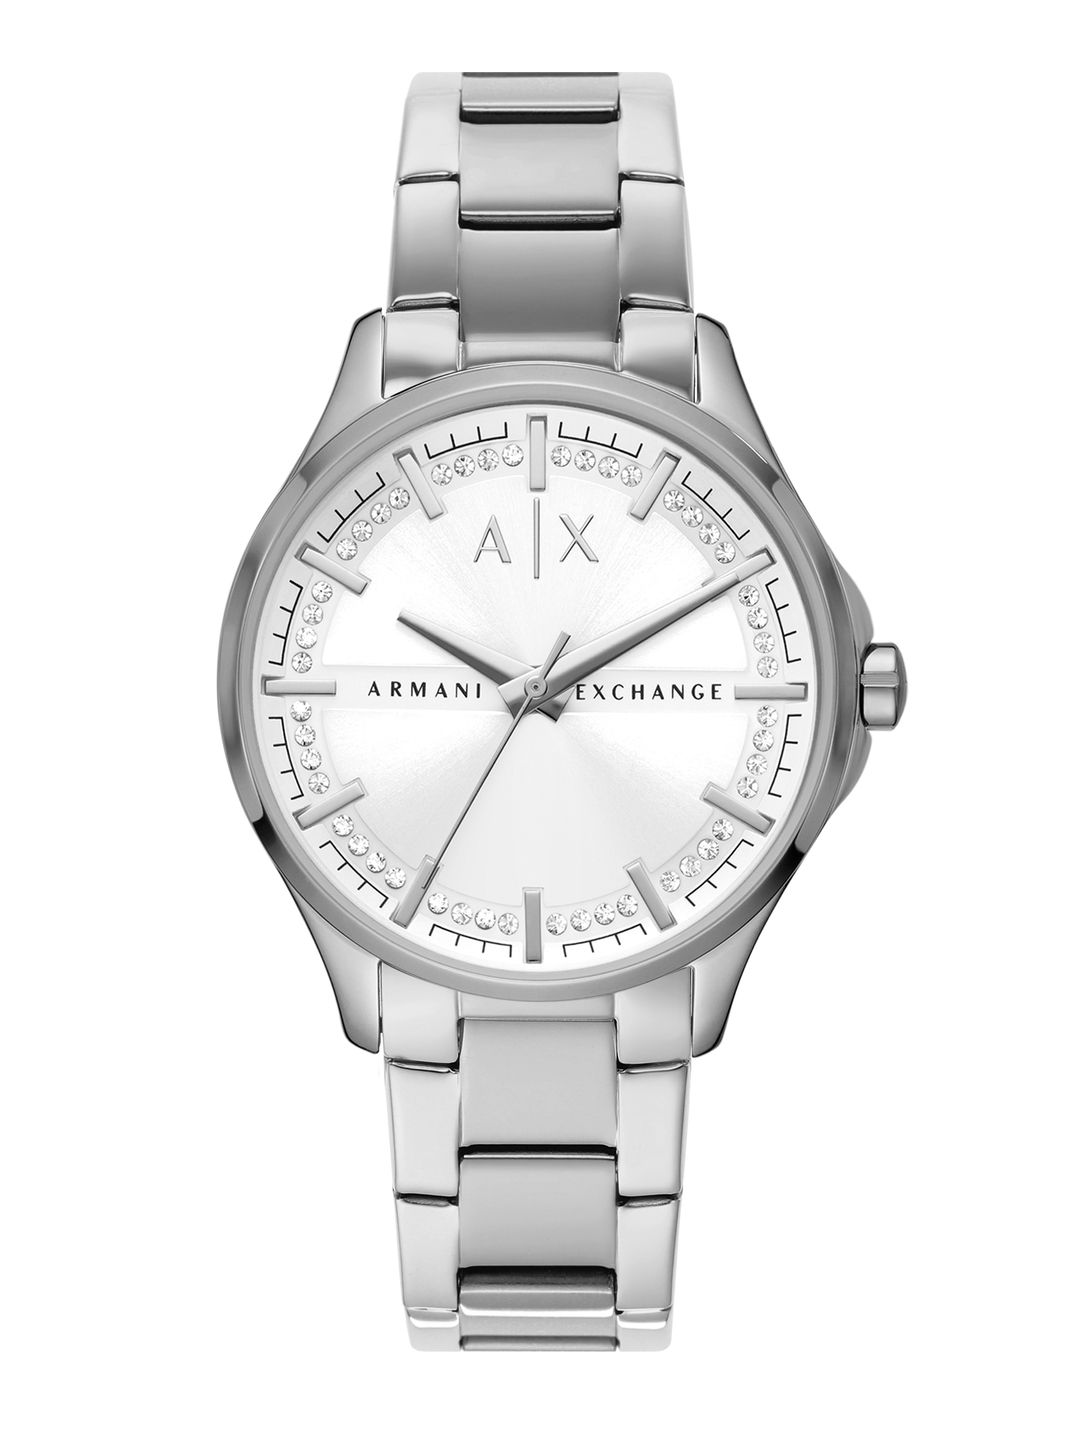 Armani Exchange Women Silver-Toned Dial & Bracelet Style Straps Analogue Watch AX5256 Price in India